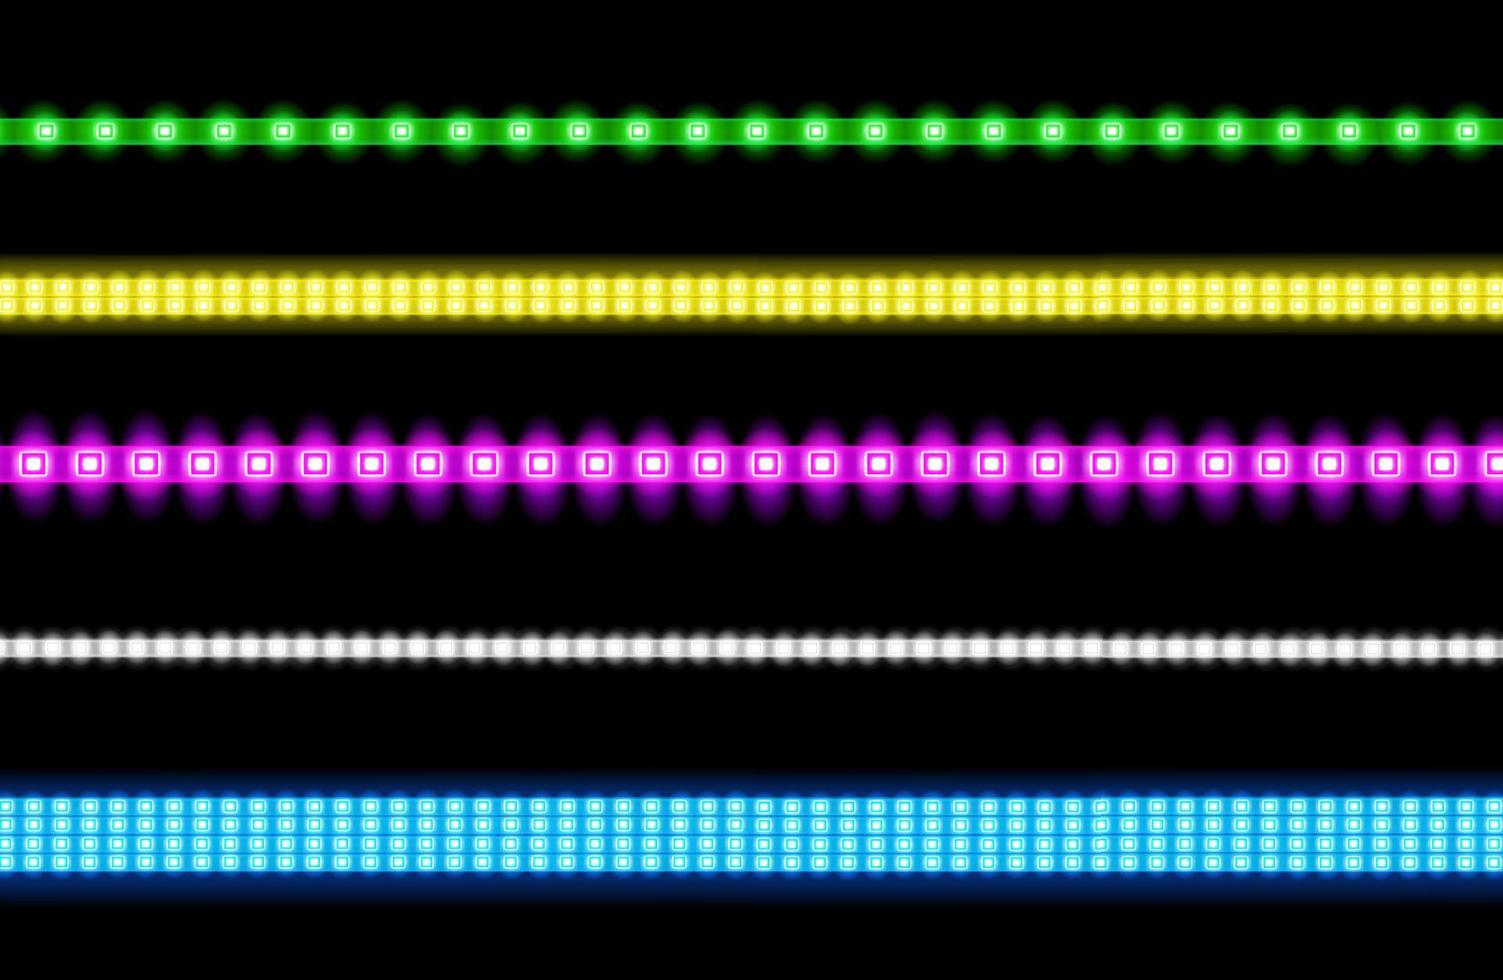 Vector set of led strips with neon glow effect